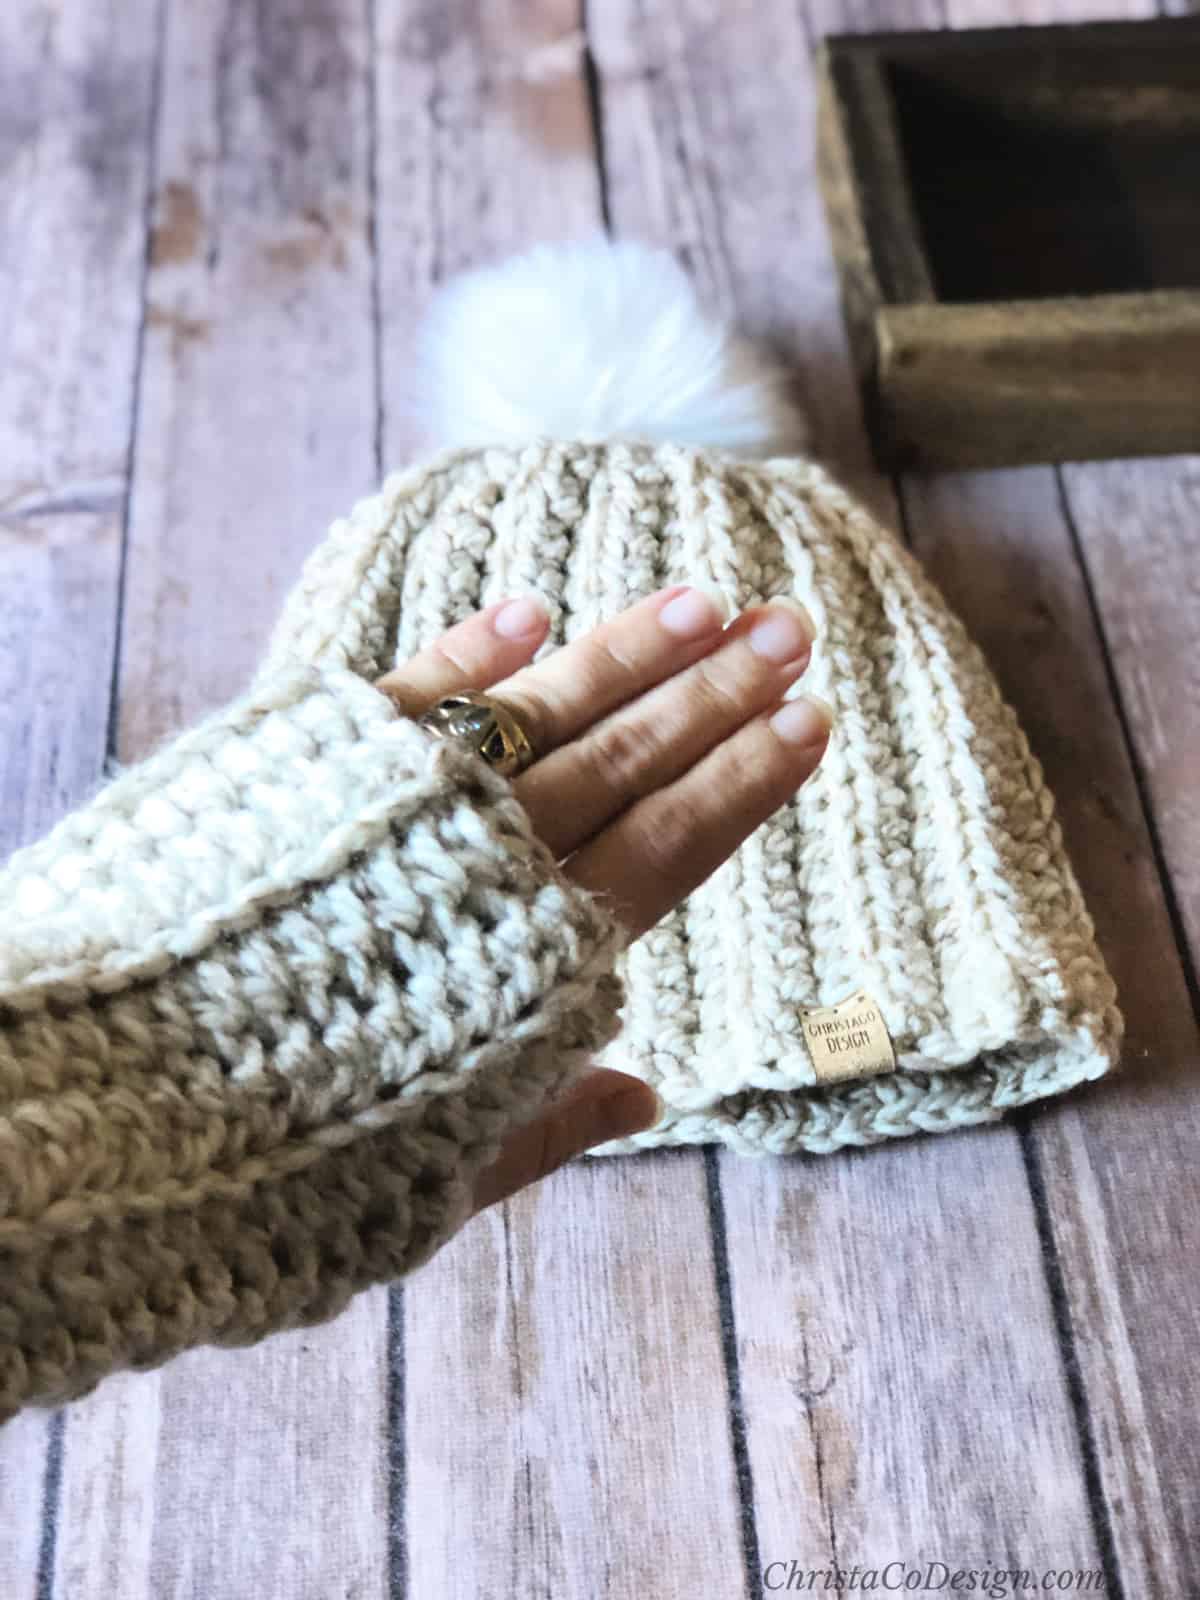 Woman's hand in chunky ribbed crochet fingerless glove over matching hat.